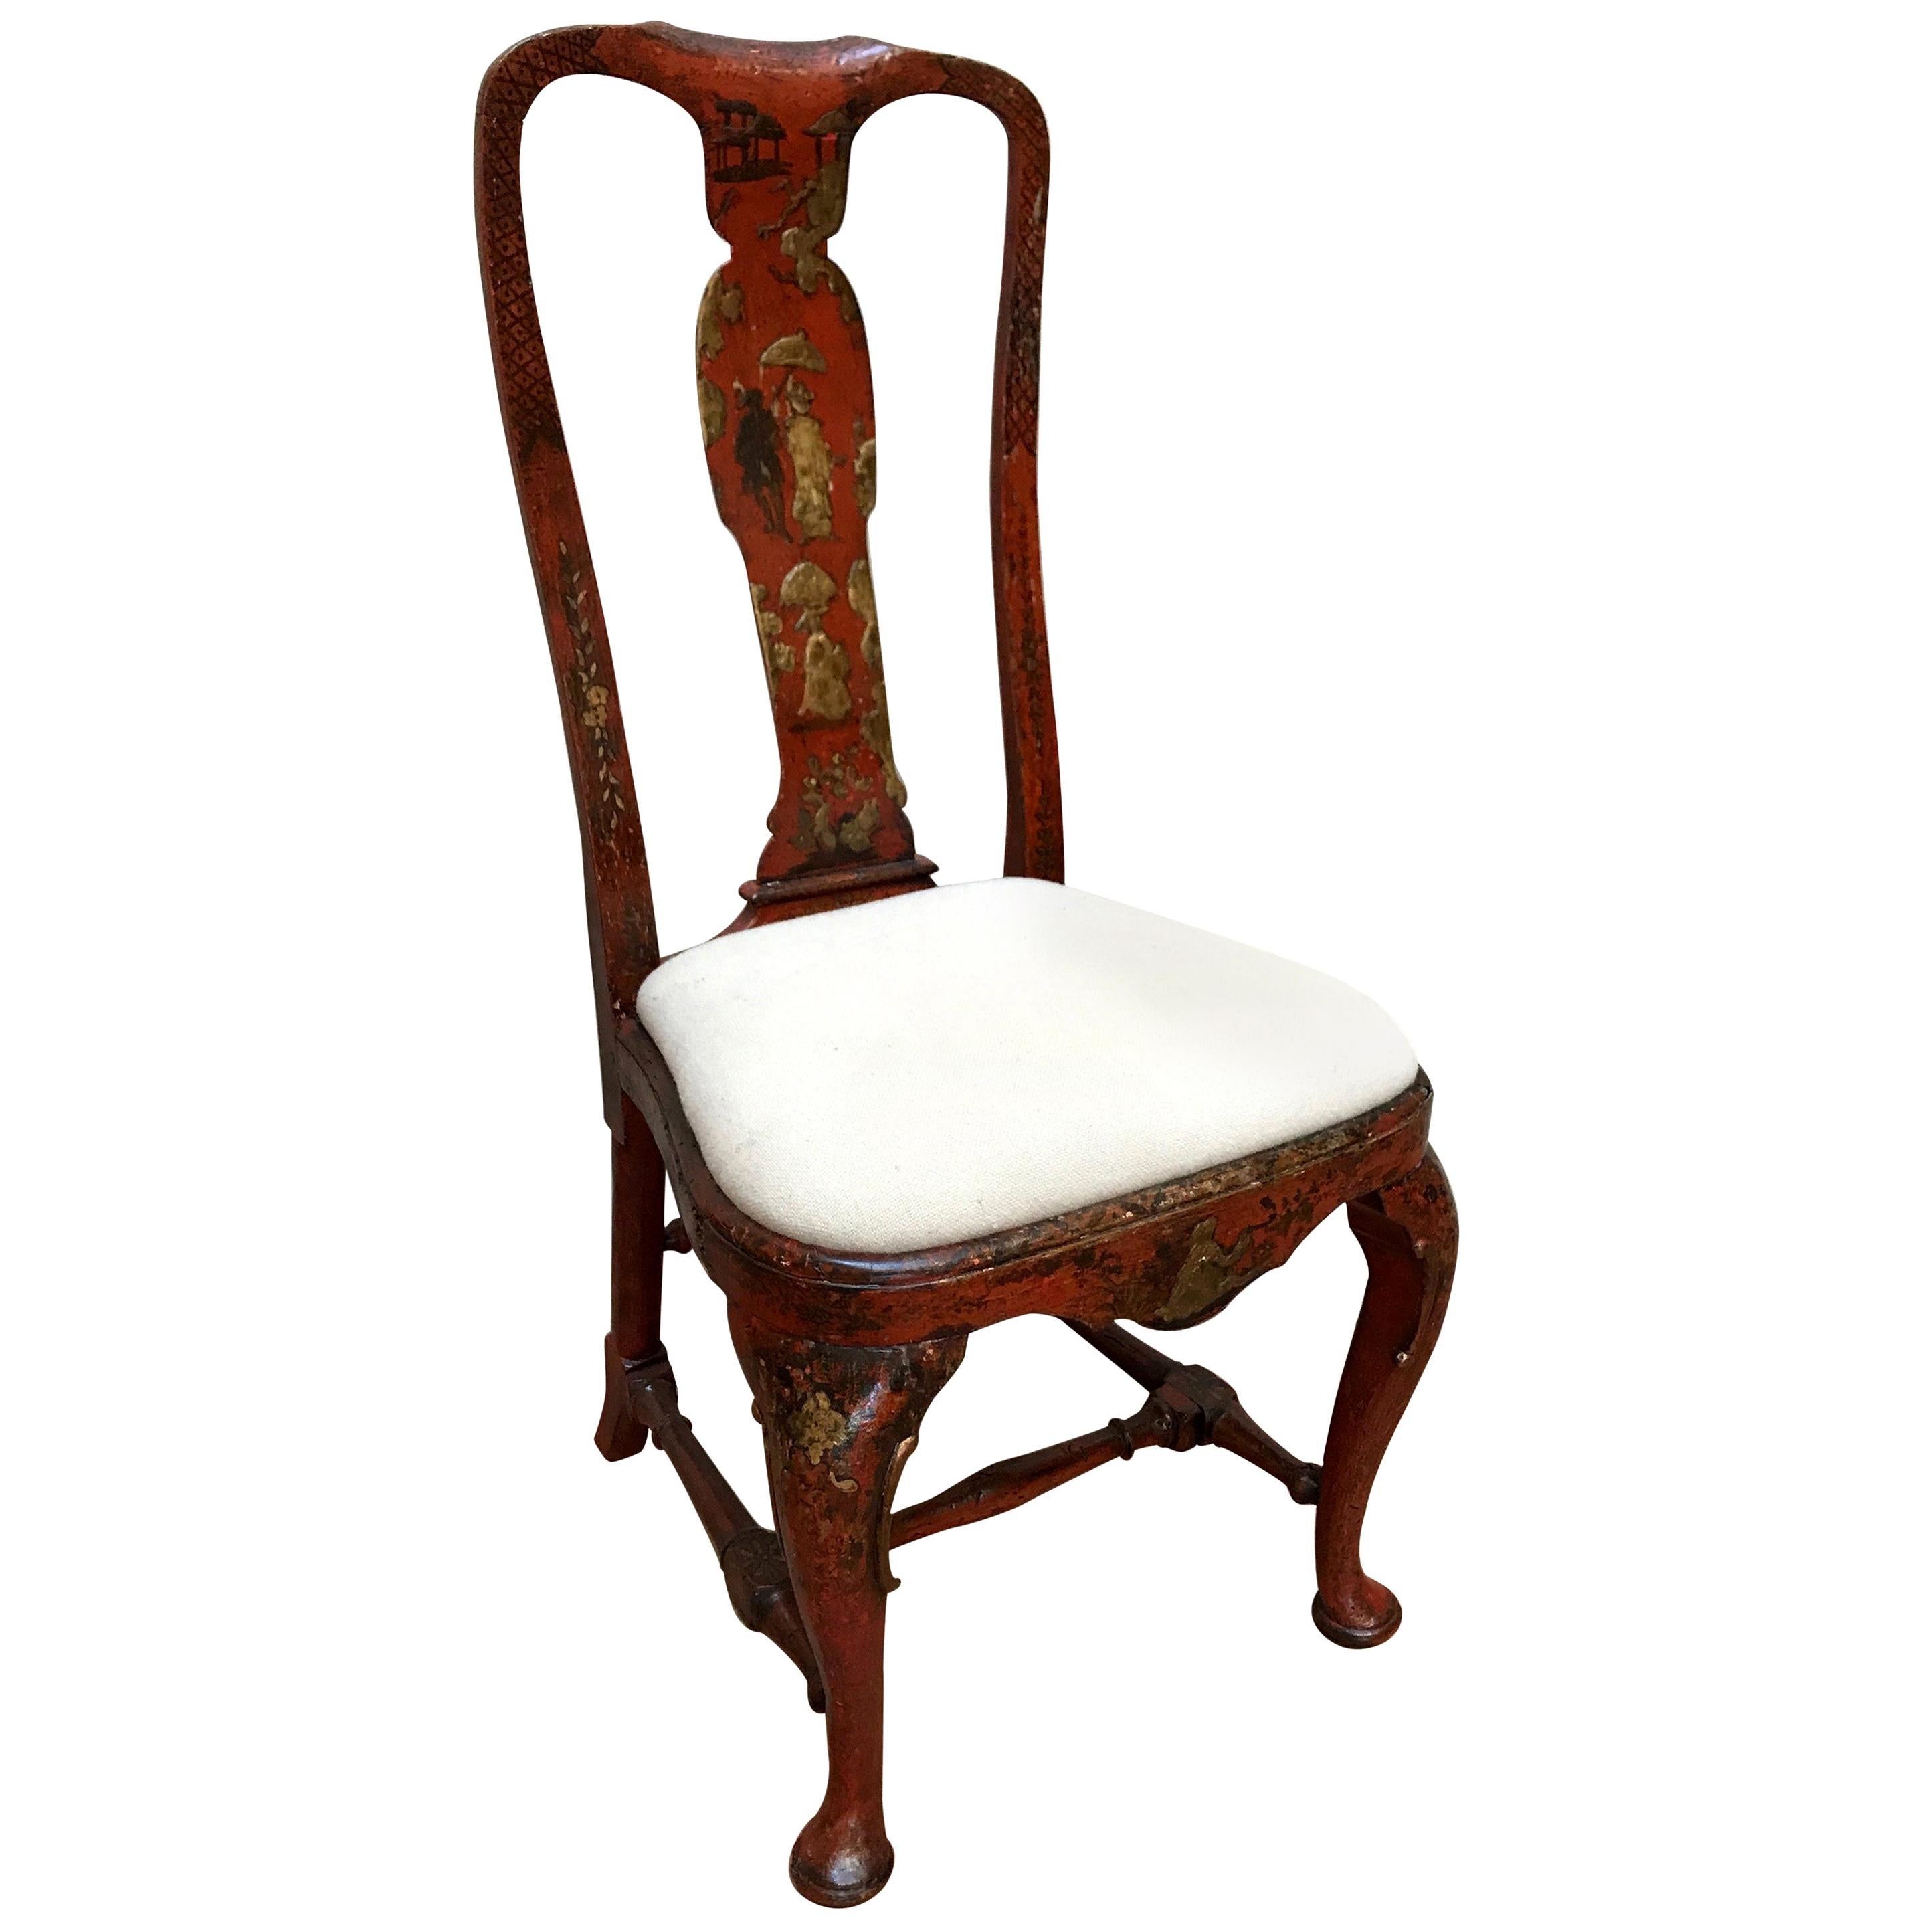 18th Century Queen Anne Period Red Lacquer and Gold Gilt Side Chair